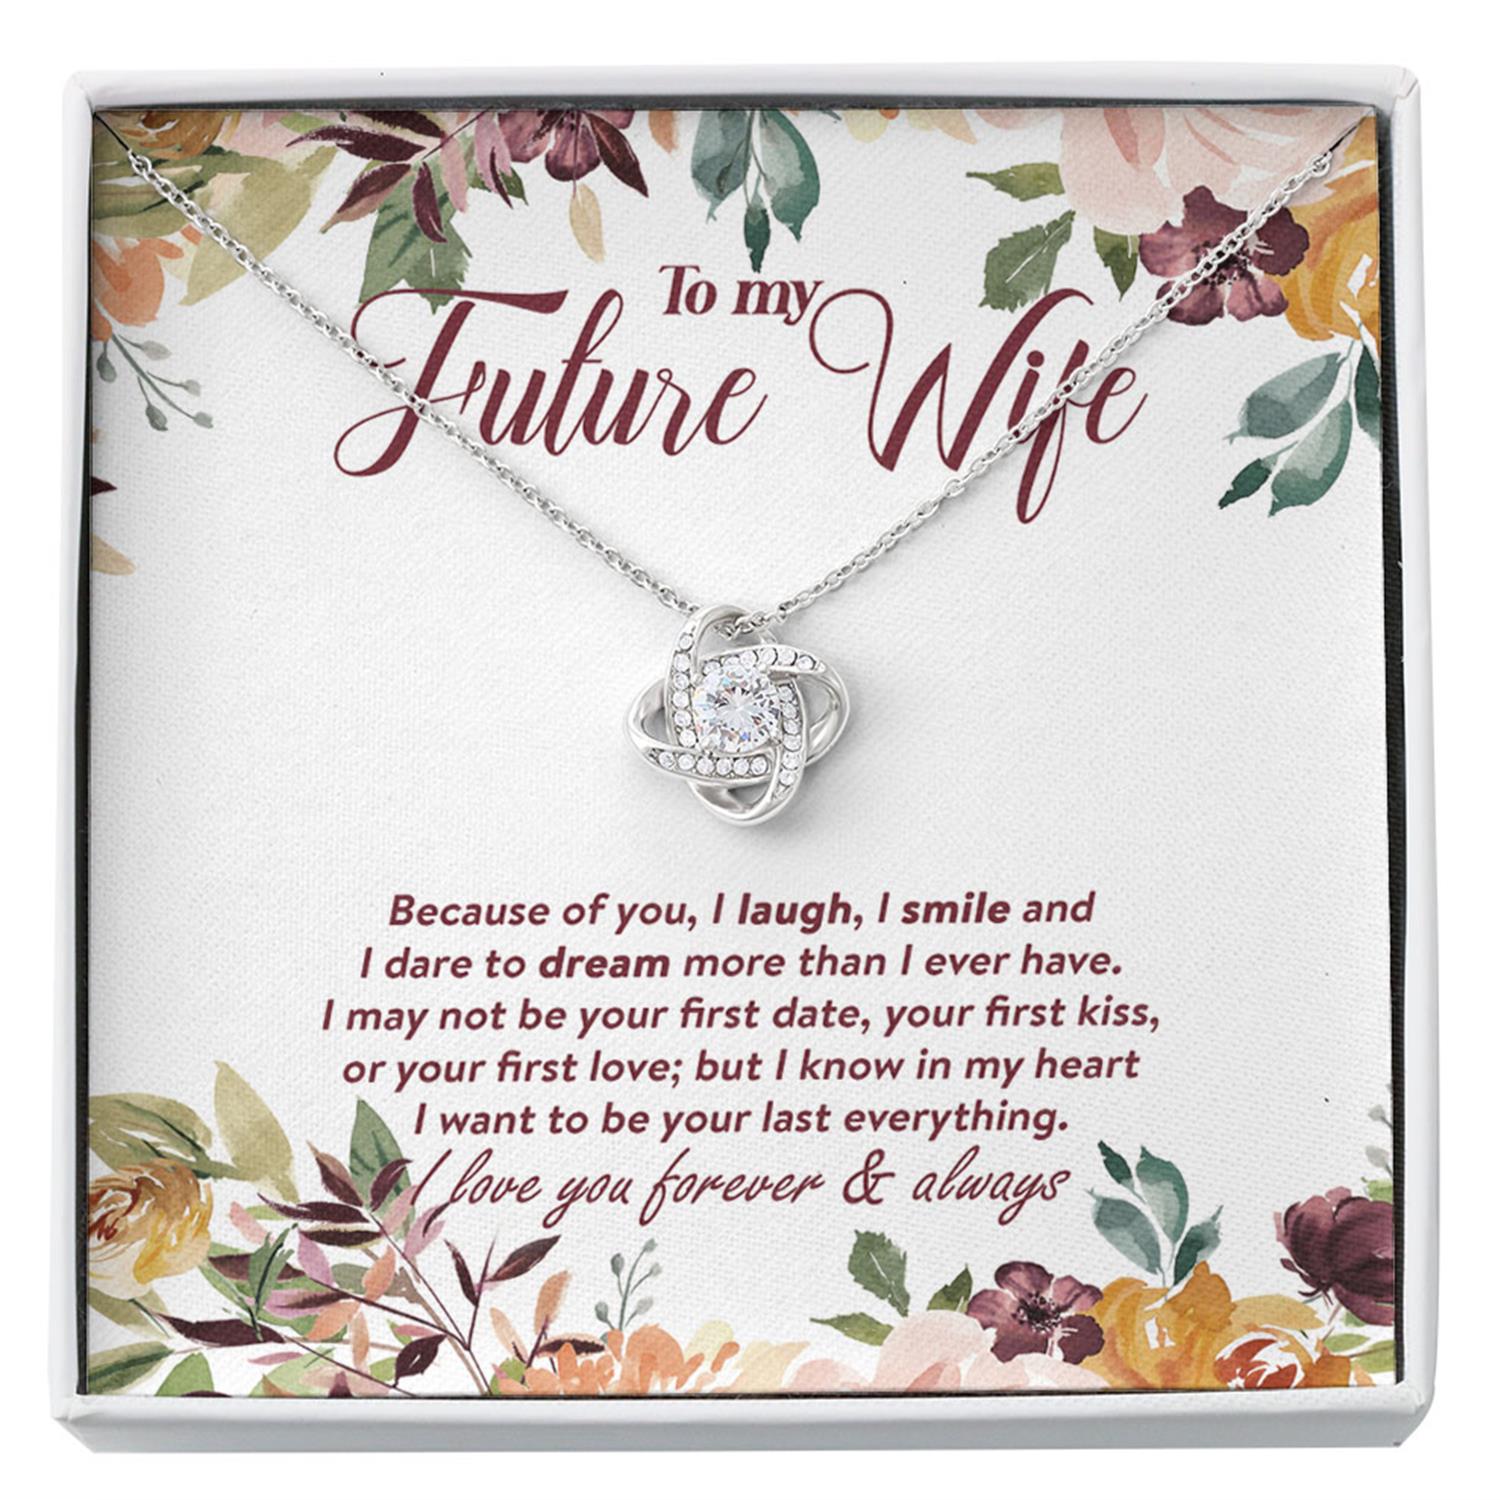 Future Wife Necklace, To My Future Wife Necklace, Gift For Future Wife, Girlfriend, Soulmate, Fiancee Custom Necklace